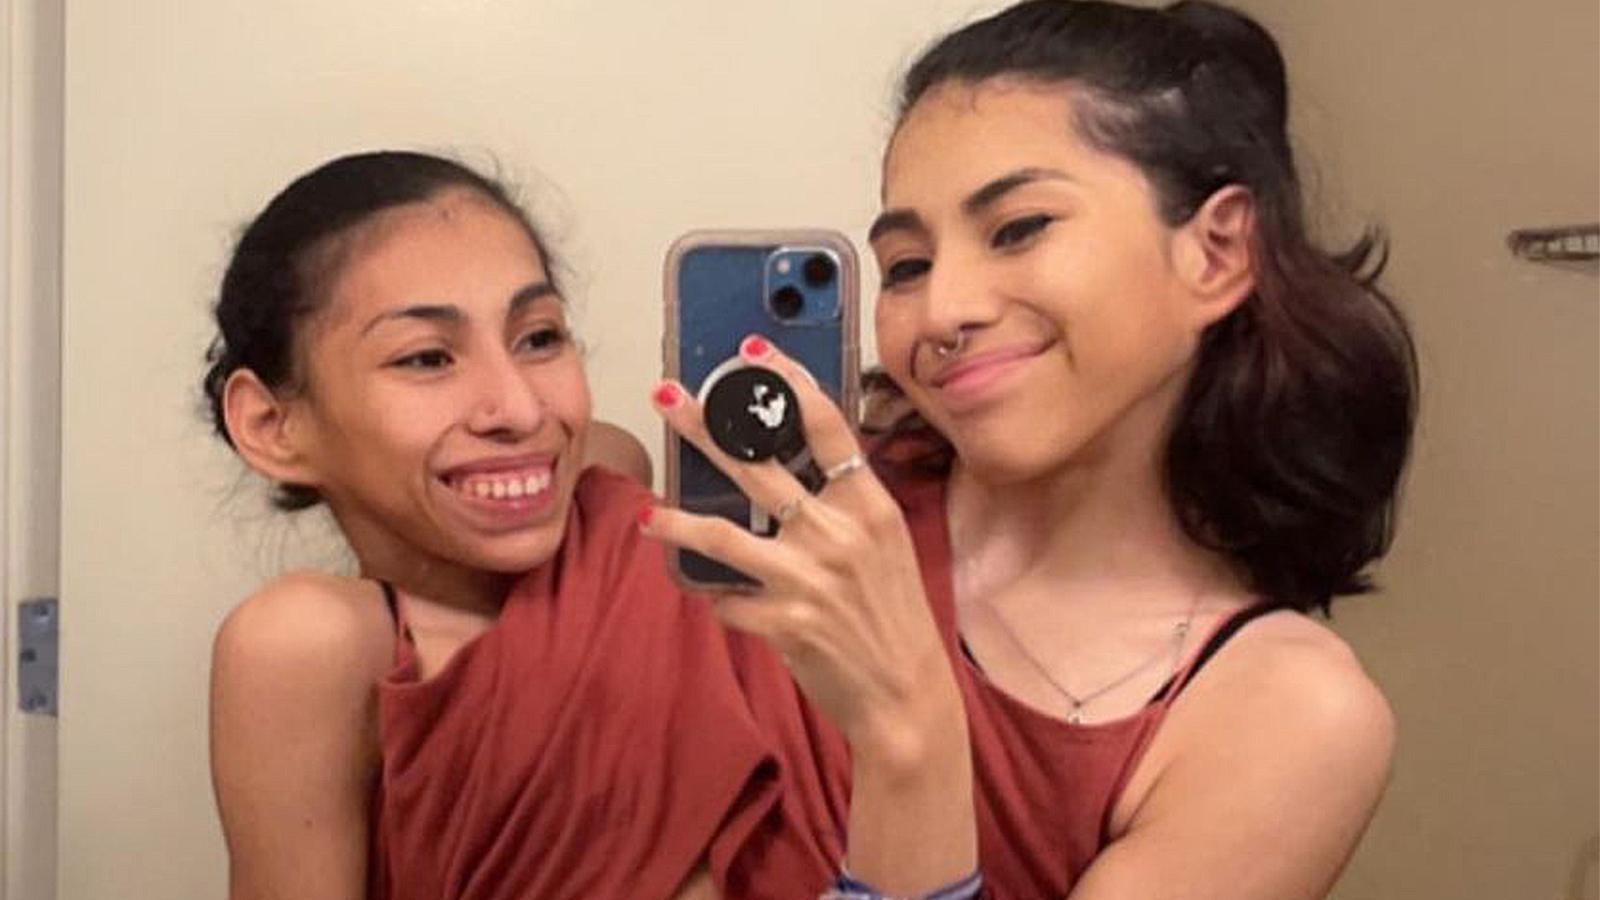 TikTok famous conjoined twins explain how their dating lives work